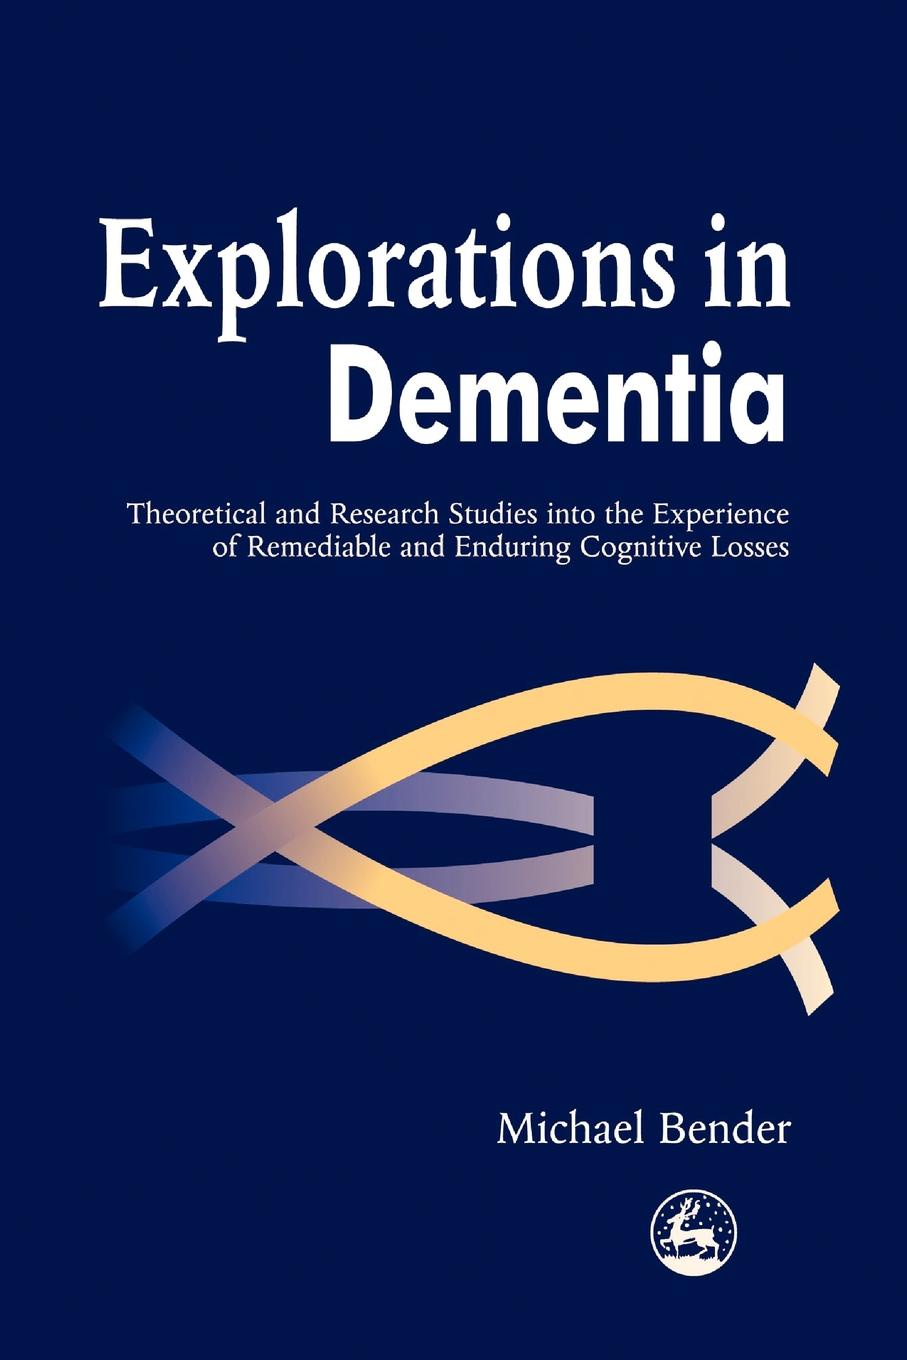 Explorations in Dementia. Theoretical and Research Studies Into the Experience of Remediable and Enduring Cognitive Losses